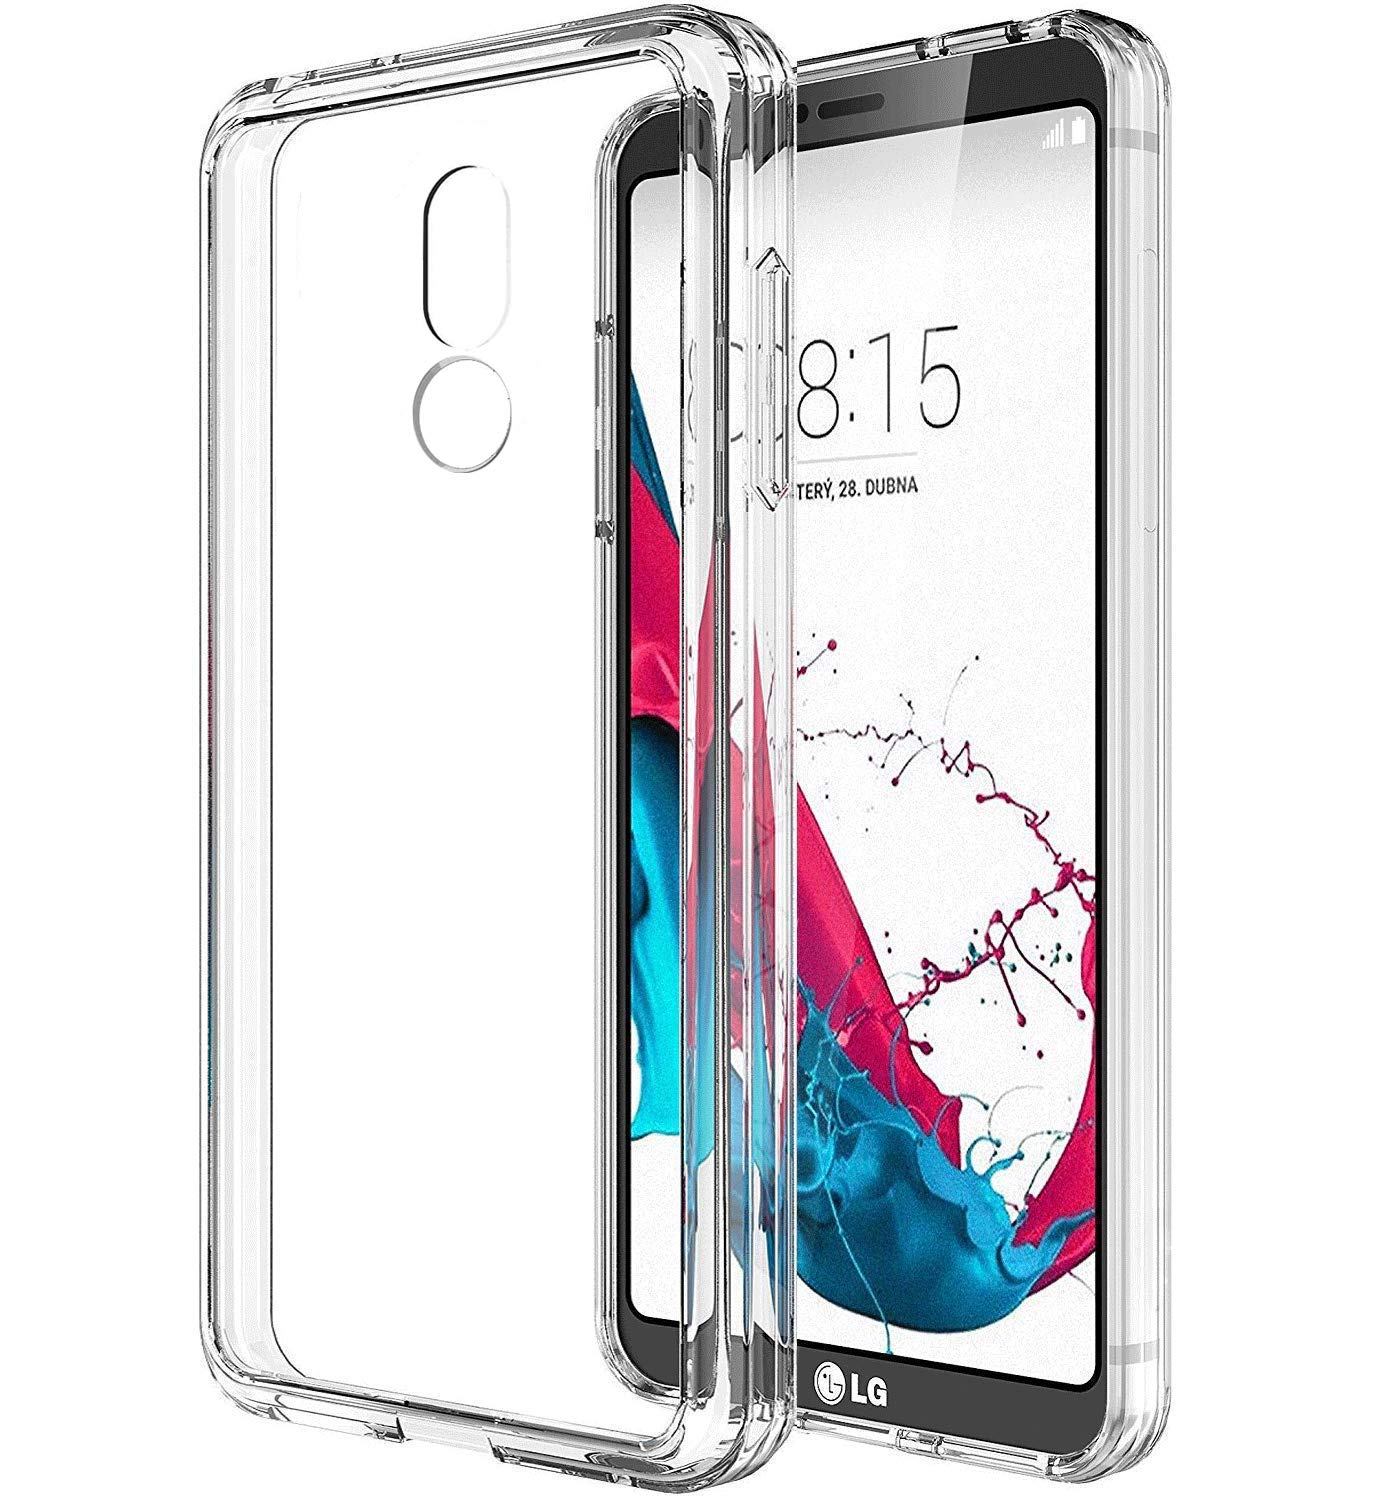 HF-LGPC-C: Clear TPU Protective Case FOR LG Smart Phones